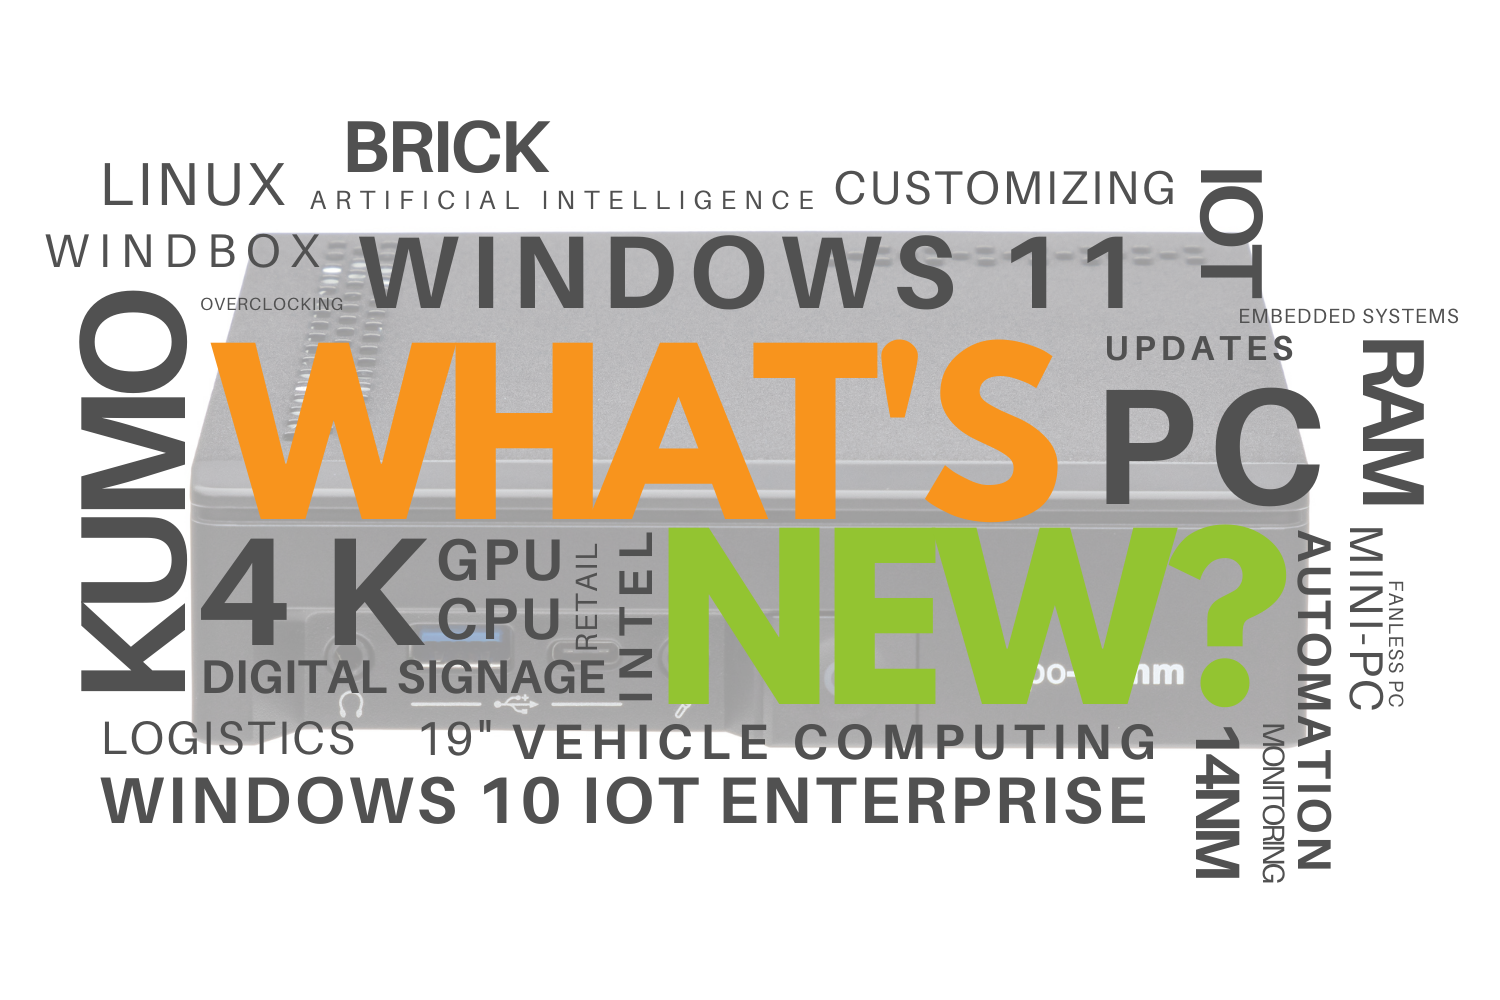 What’s new? NANO H310 is EOL & Windows 11 now available